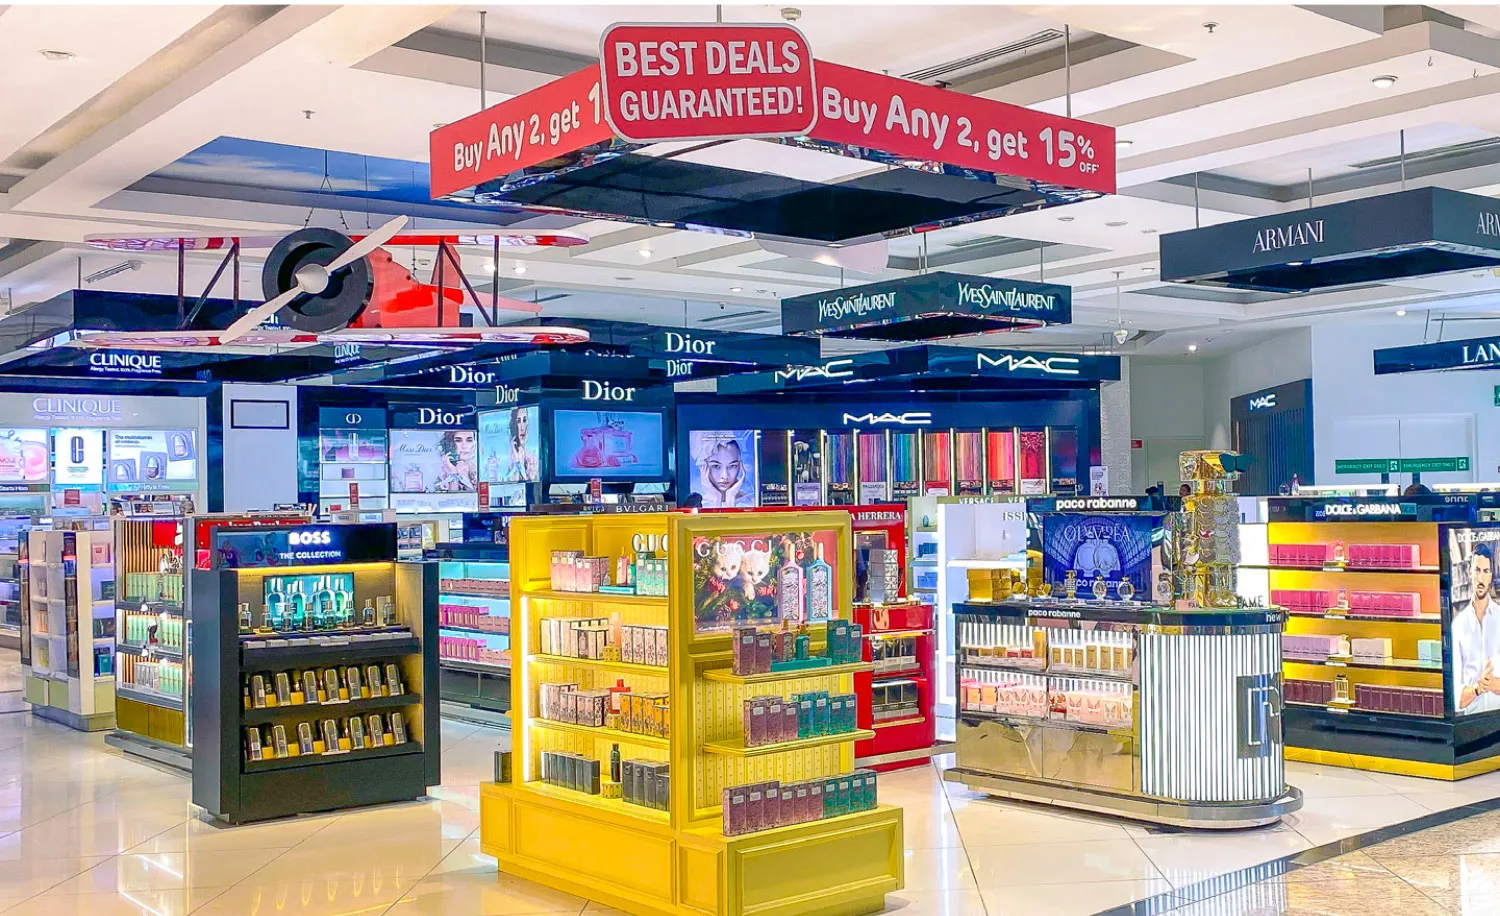 The Times are Changing at Travel Retail